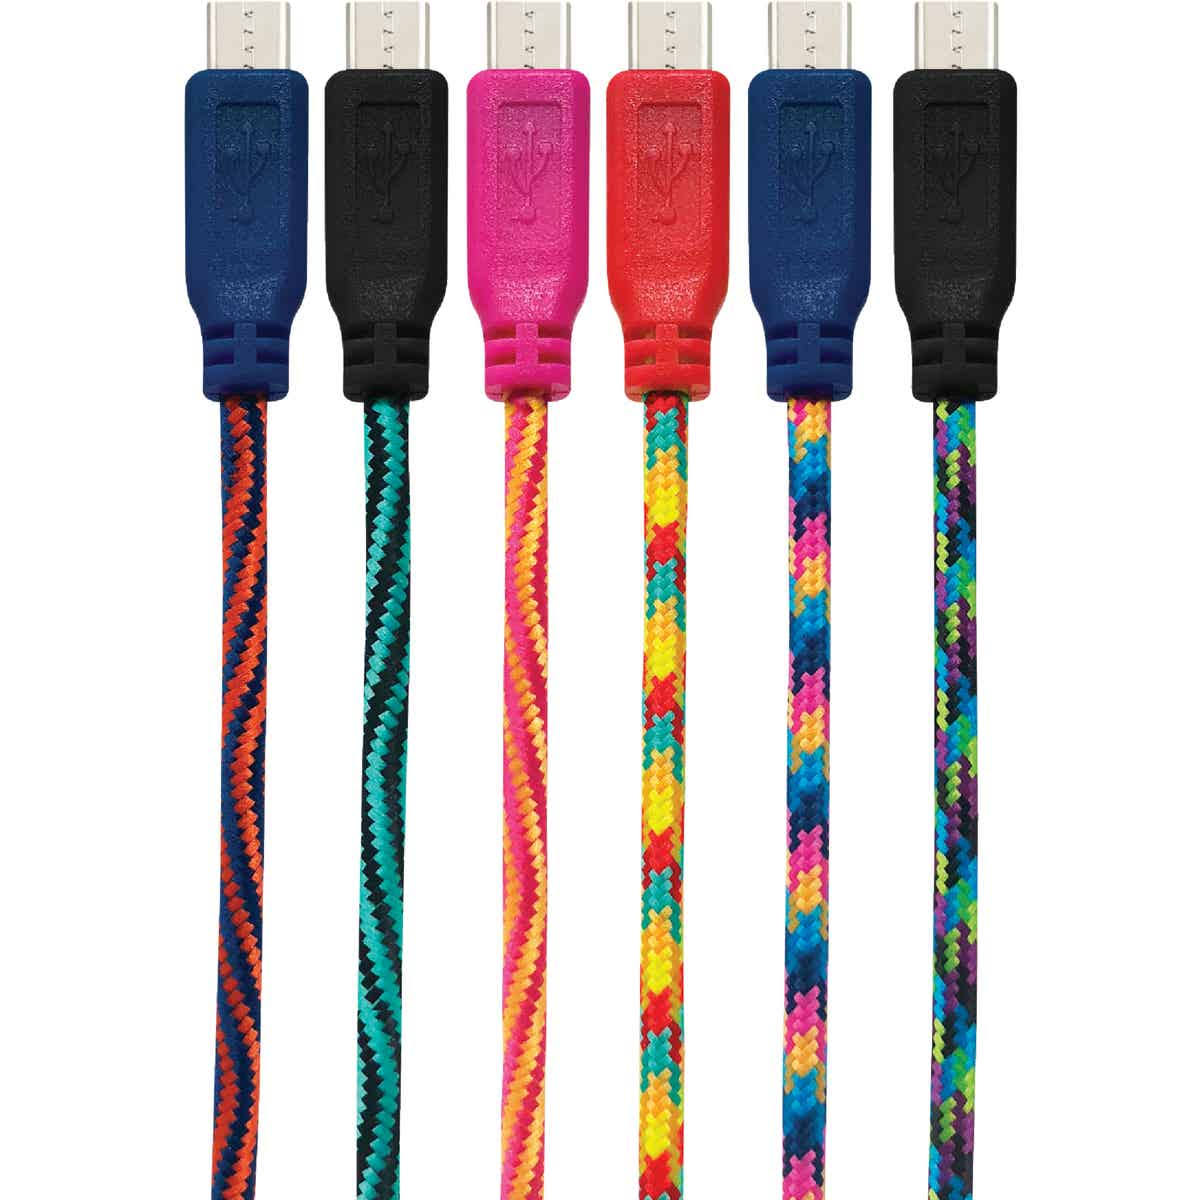 Braided Micro USB Charge & Sync Cable - 10', Assorted Patterns